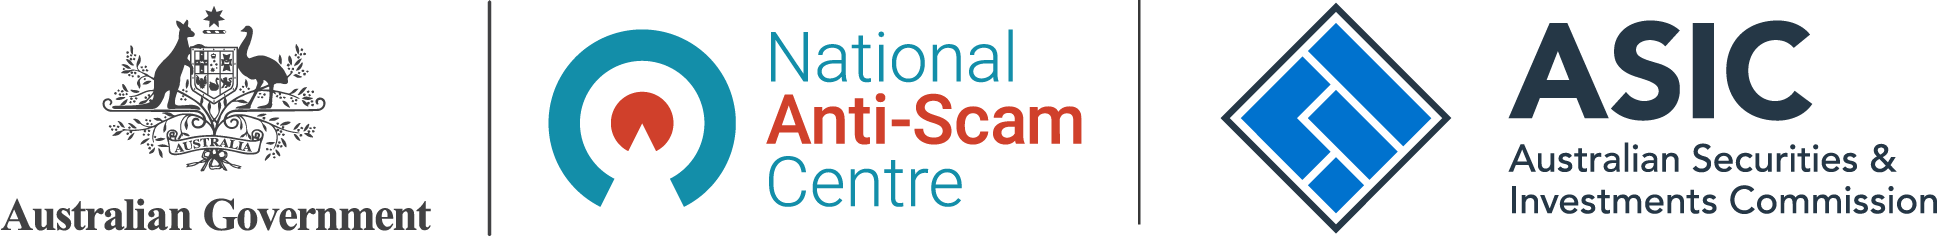 Logos for the Australian Government's National Anti-Scam Centre and Australian Securities and Investments Commission